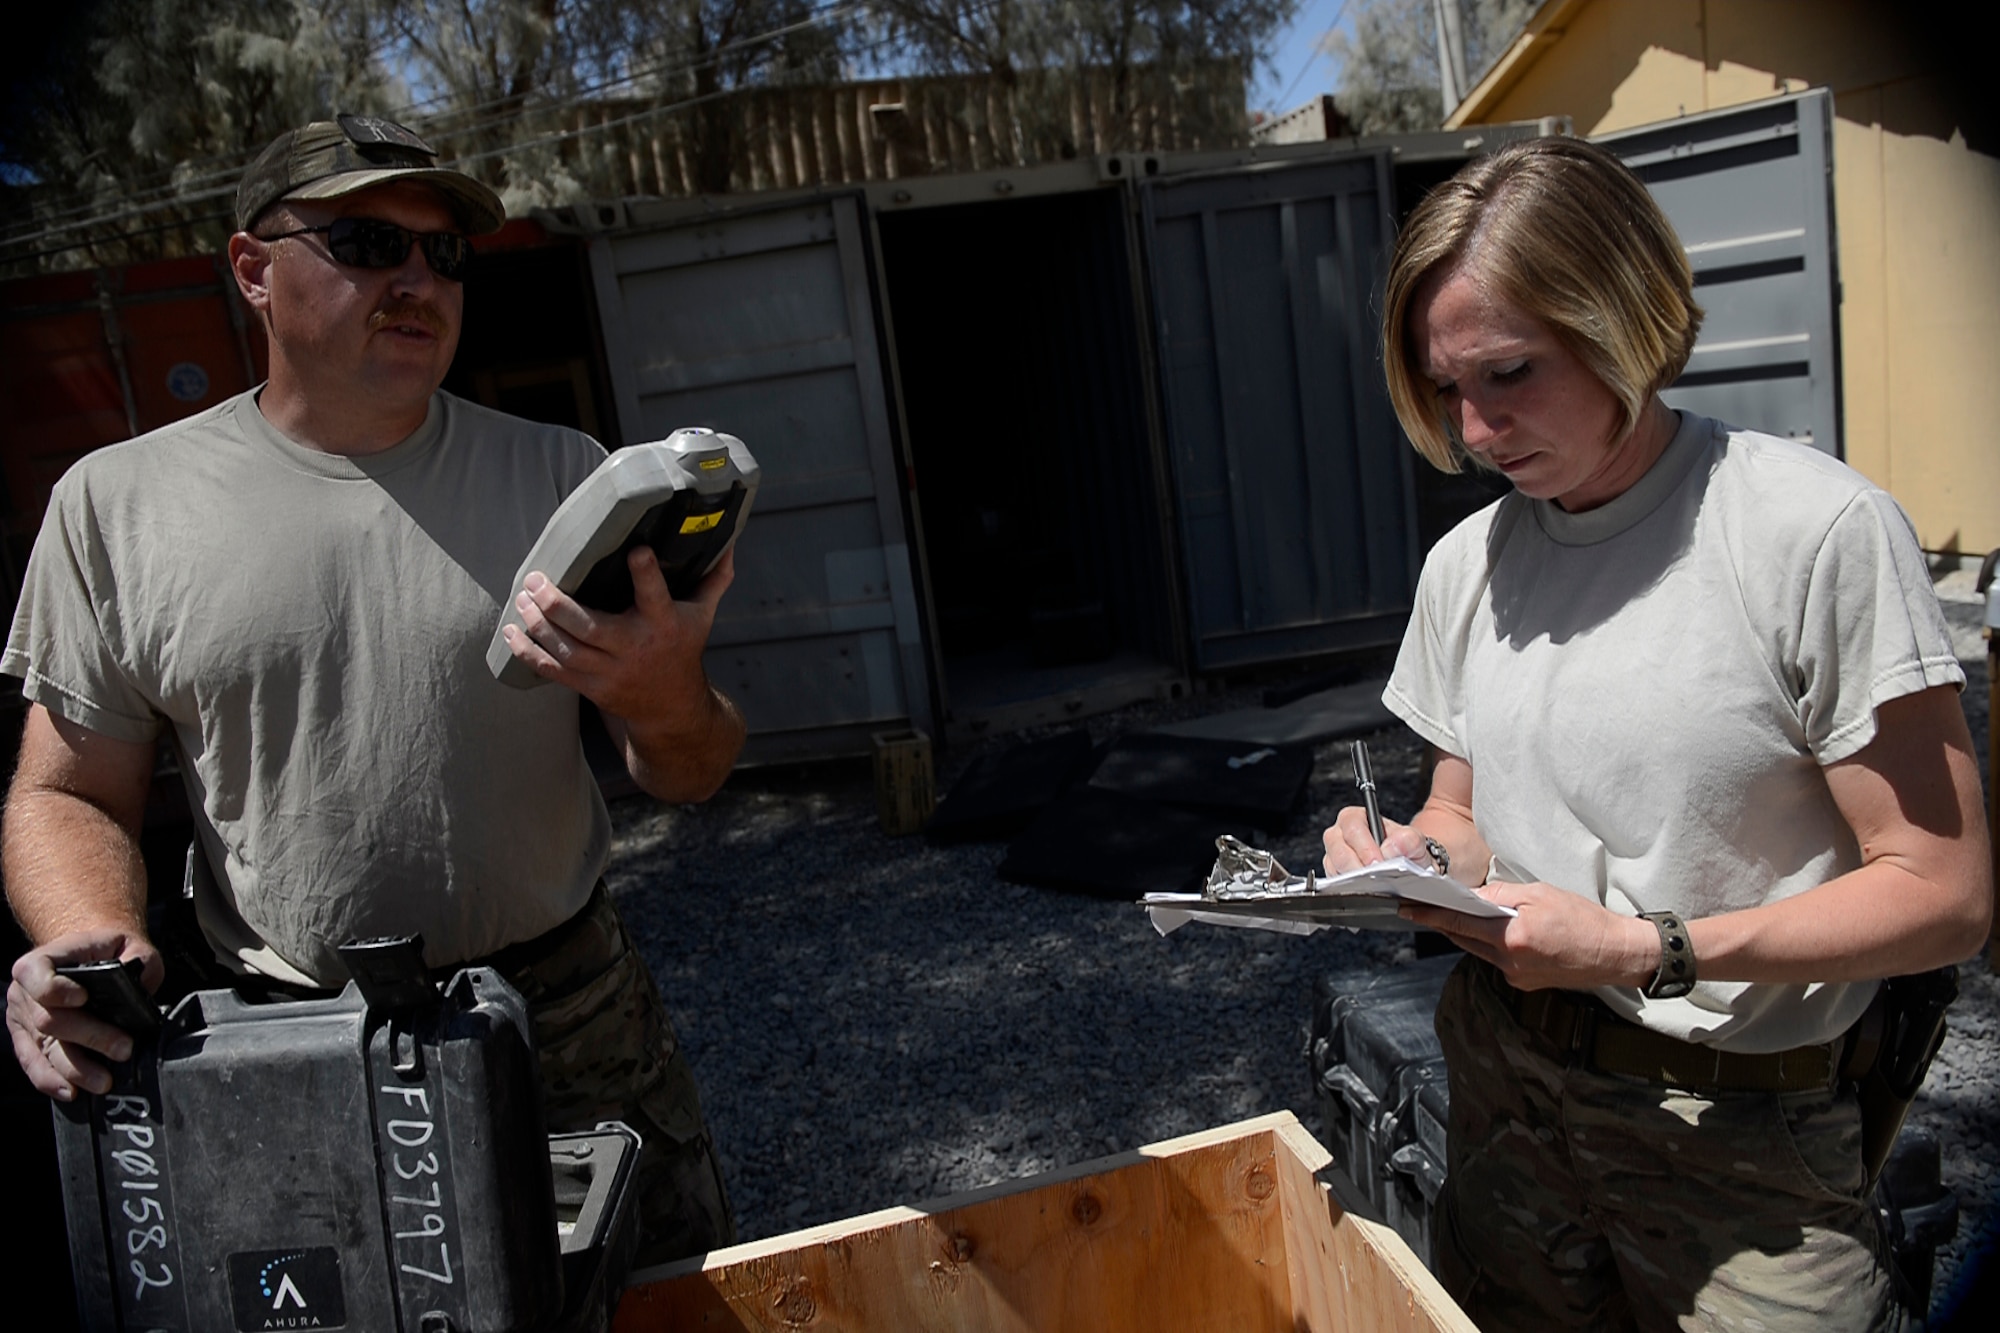 Master Sgt. Phillip Hauser (left) and Tech Sgt. Stacy Trosine inventory equipment at Kandahar Airfield, Afghanistan Aug. 18, 2014.  Hauser and Trosine are EOD logistics management non-commissioned officers-in-charge with 466th Operating Location Bravo. Since 2004, there have been 20 rotations of more than 600 EOD technicians who have left their mark in the history of Operation Enduring Freedom.   (U.S. Air Force photo/Staff Sgt. Evelyn Chavez)